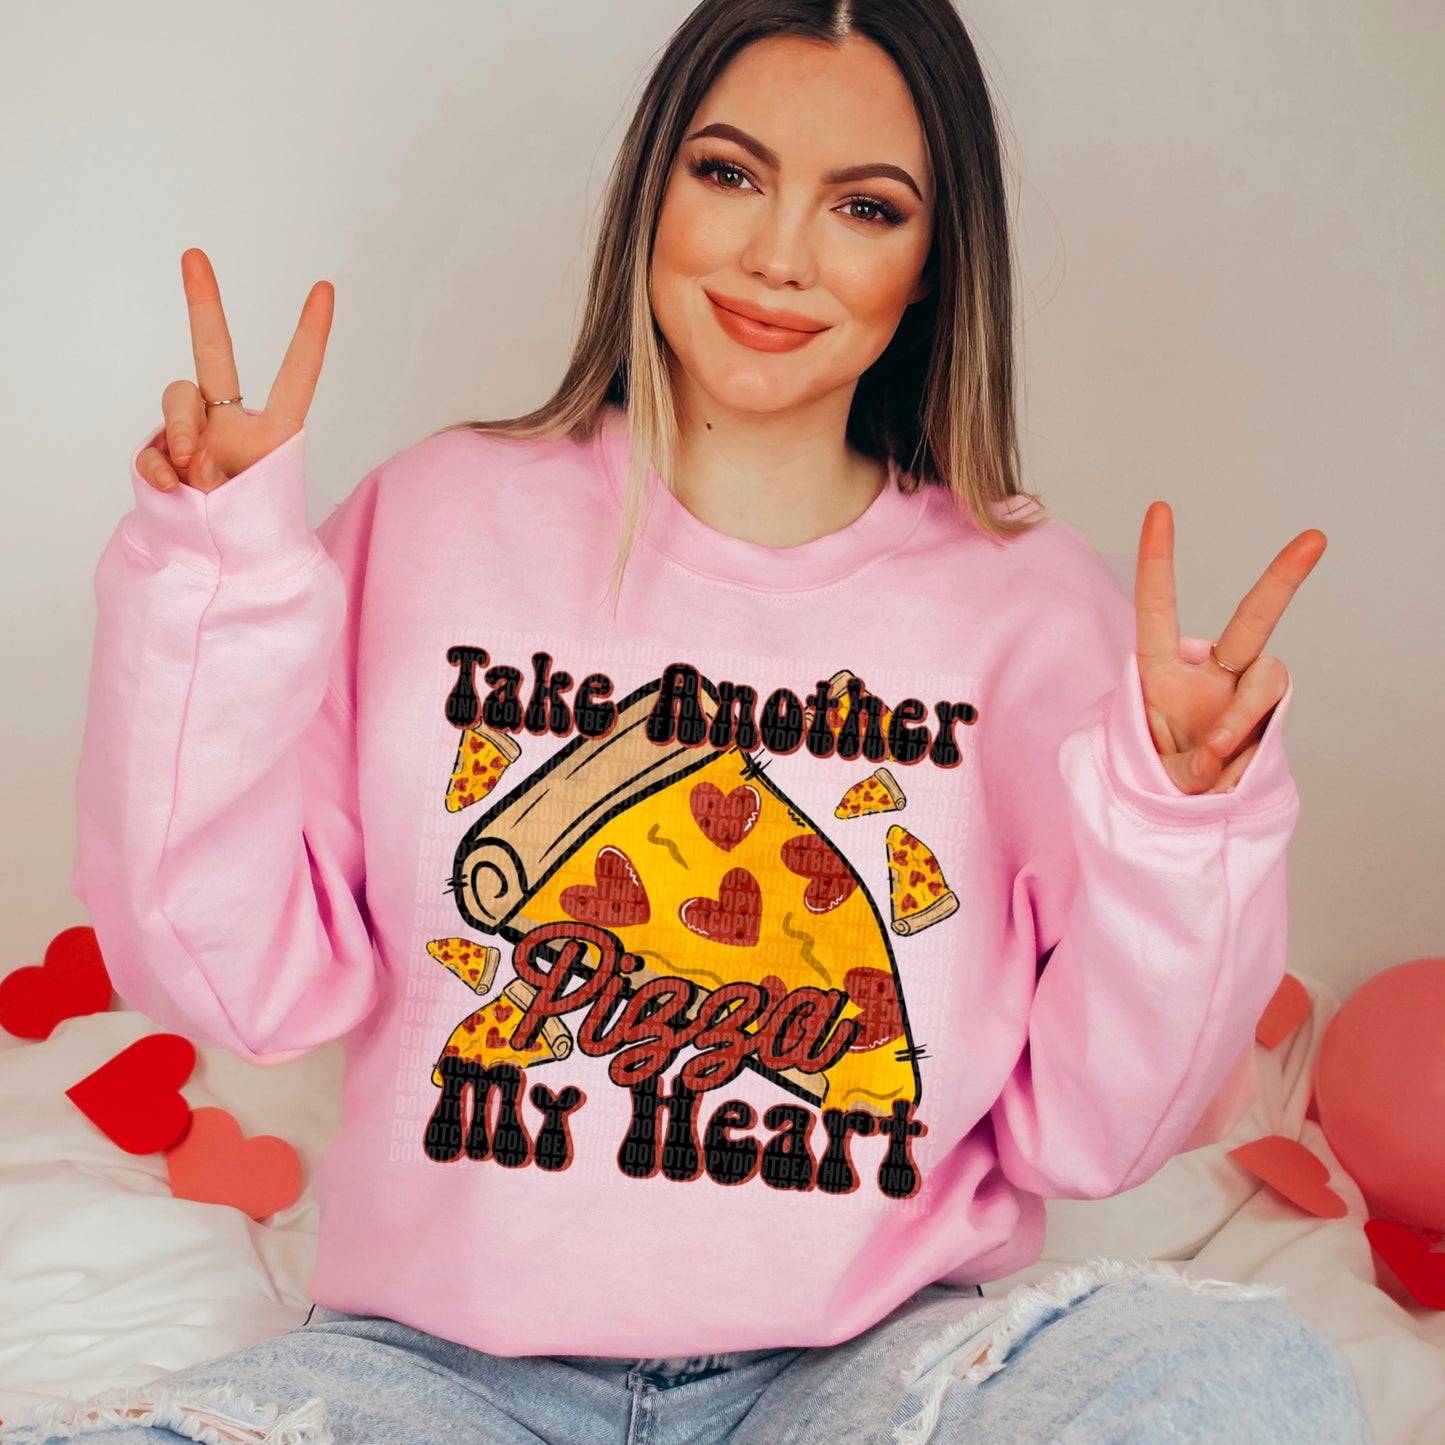 Take another pizza my heart